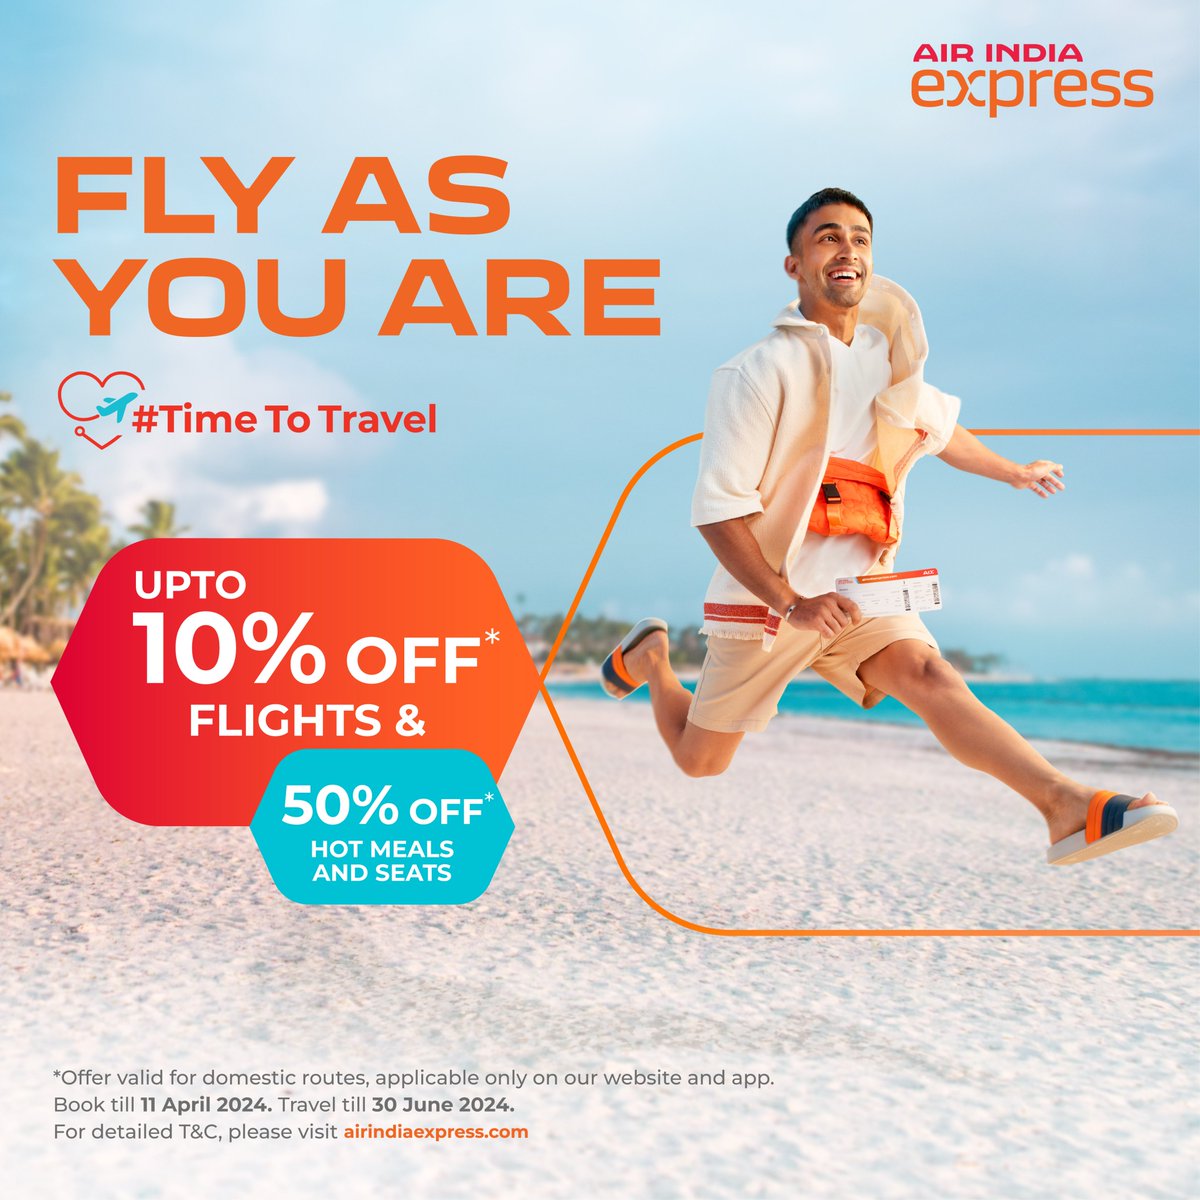 Never a better time to plan your travel than now. ✈️ Get up to 10% off domestic flights, 50% off meals and seats and up to 8% NeuCoins on flights booked on our website and app. #FlyAsYouAre and enjoy plush comfy seats, delicious Gourmair hot meals and a host of benefits. Book now